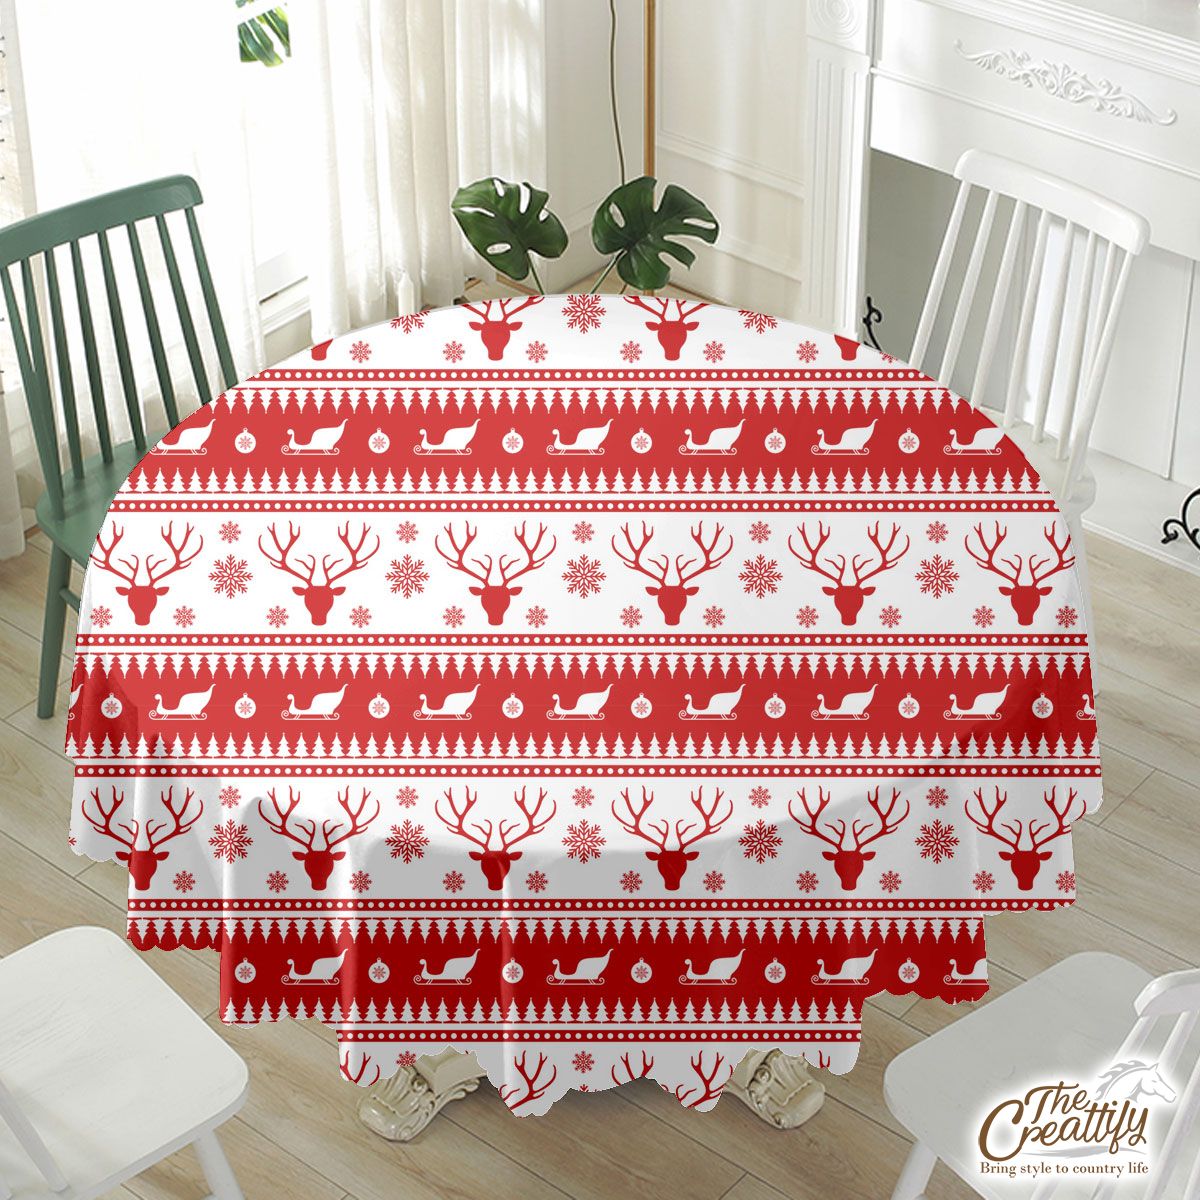 Red And White Reindeer, Santa Sleigh, Christmas Balls On The Snowflake Background Waterproof Tablecloth